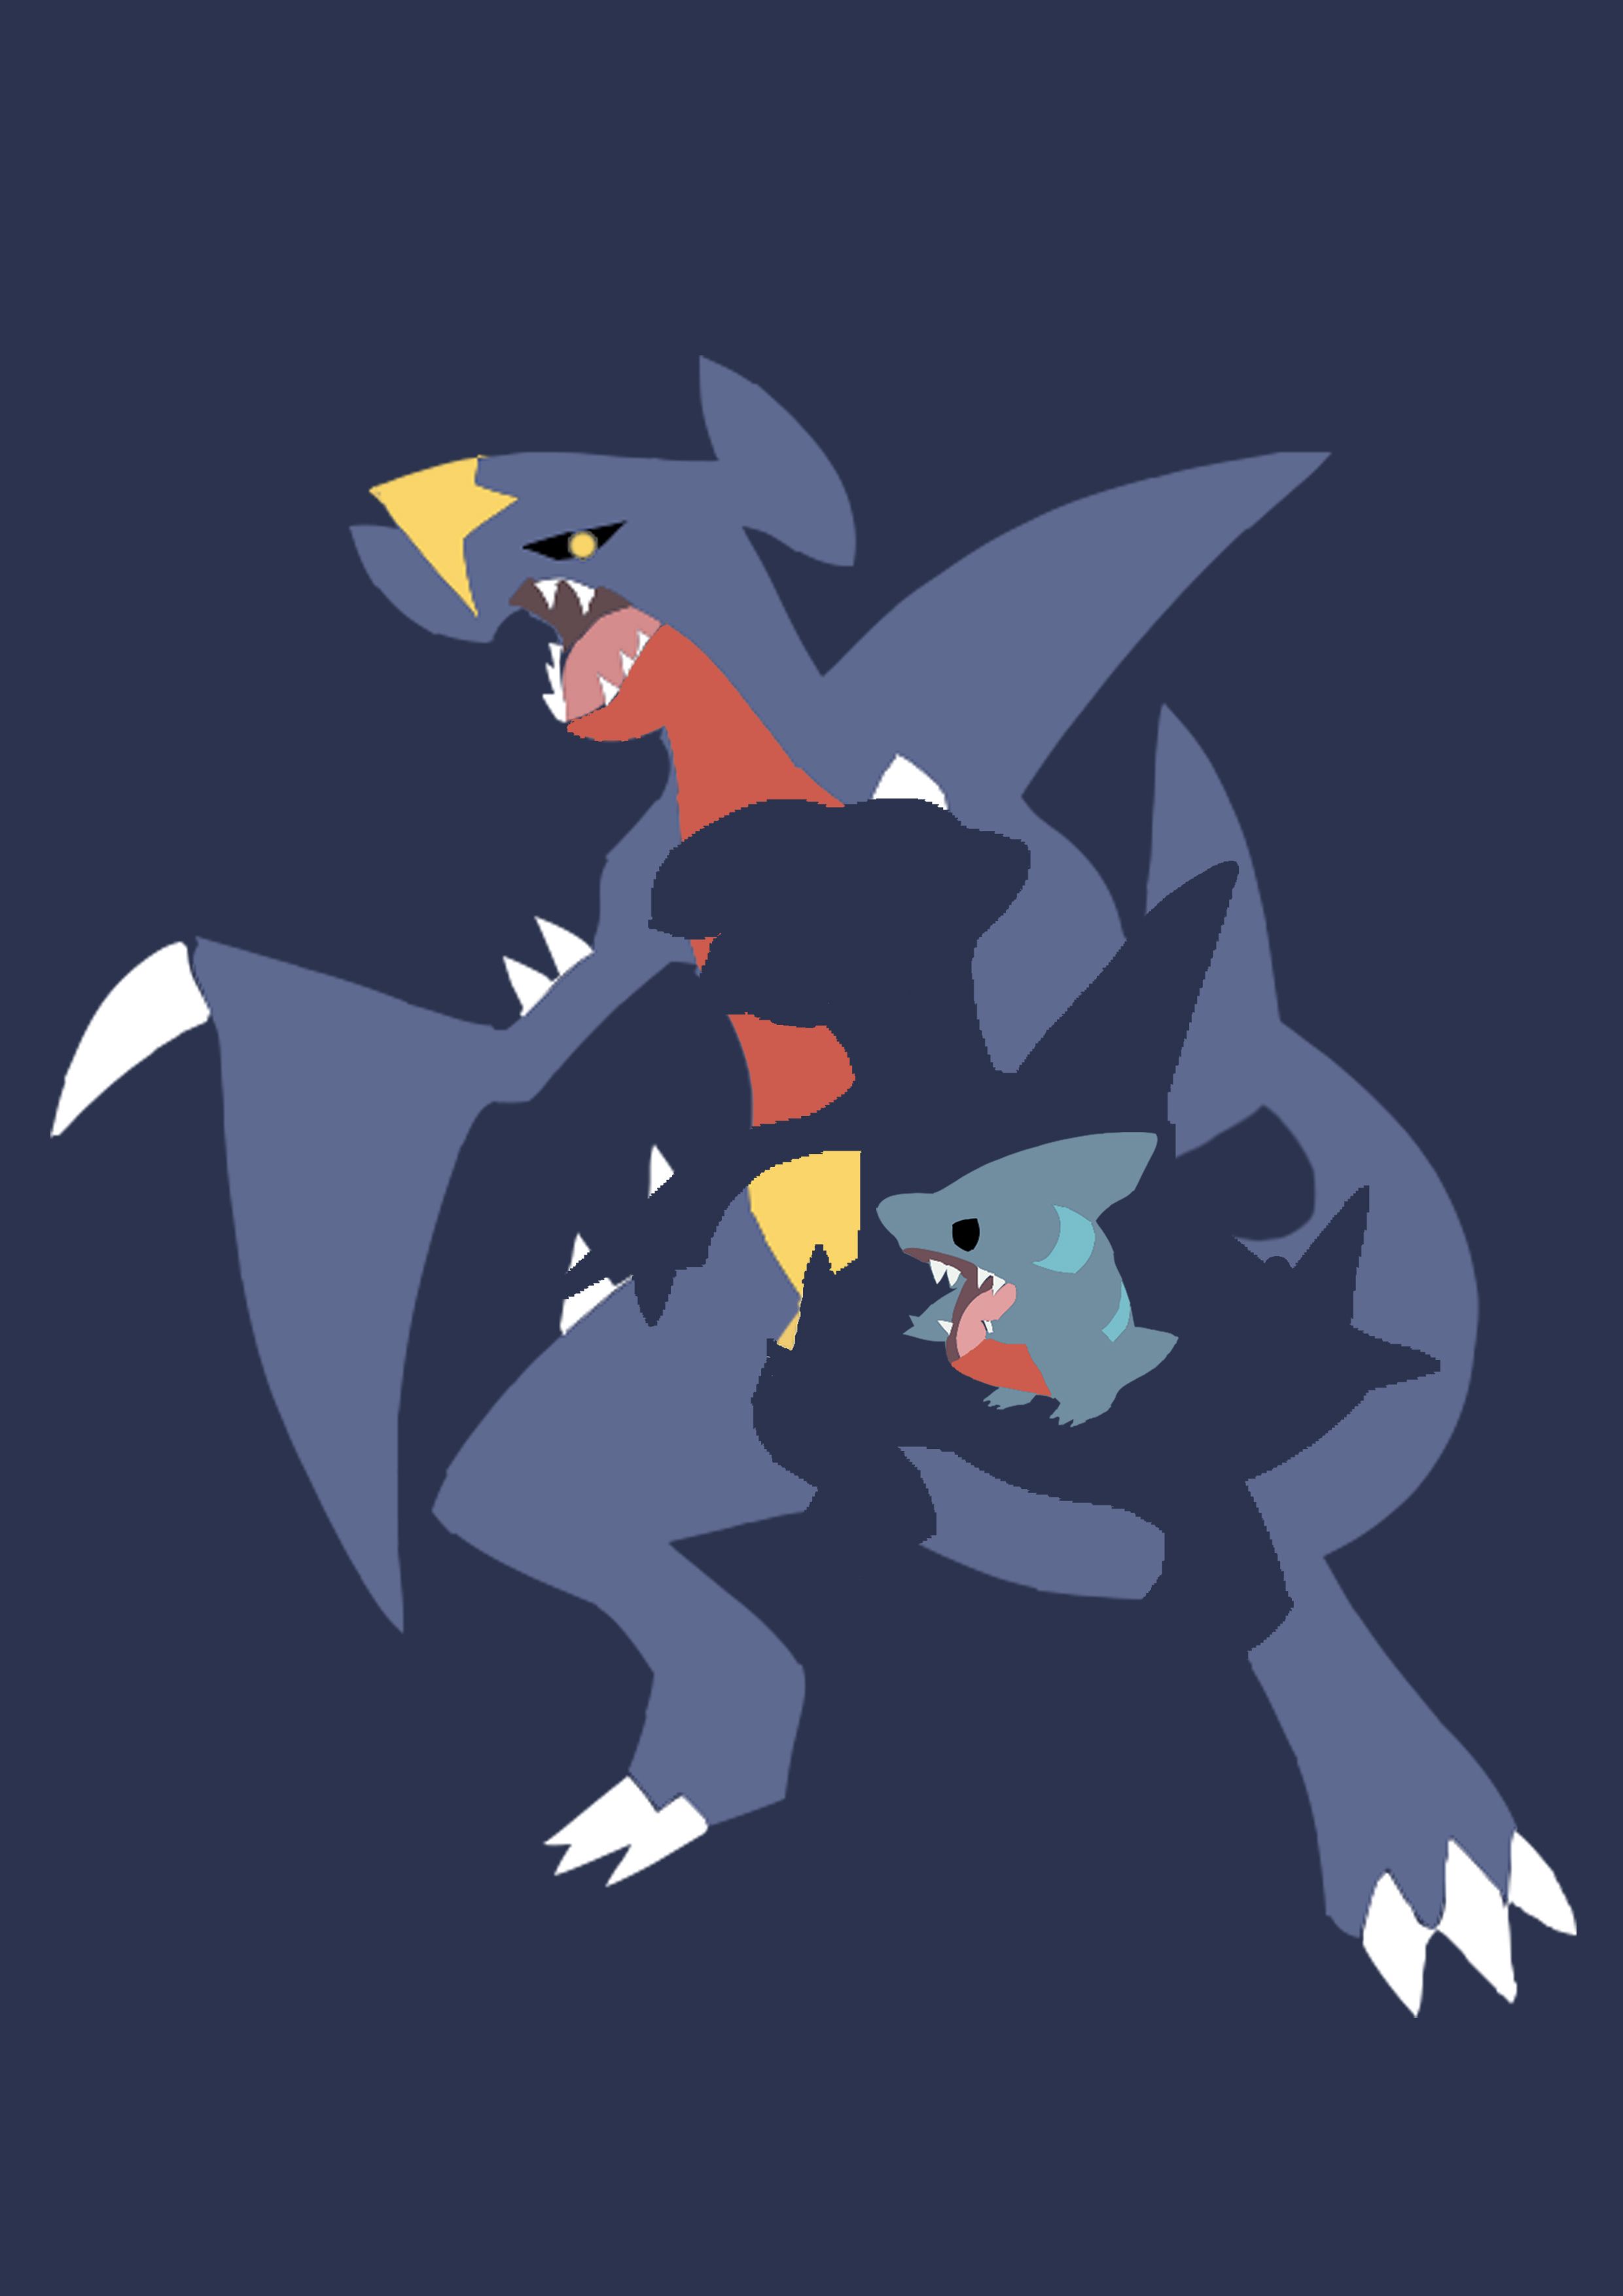 Bagon Wallpaper. Bagon Wallpaper, Bagon Pokemon Salamence Wallpaper and